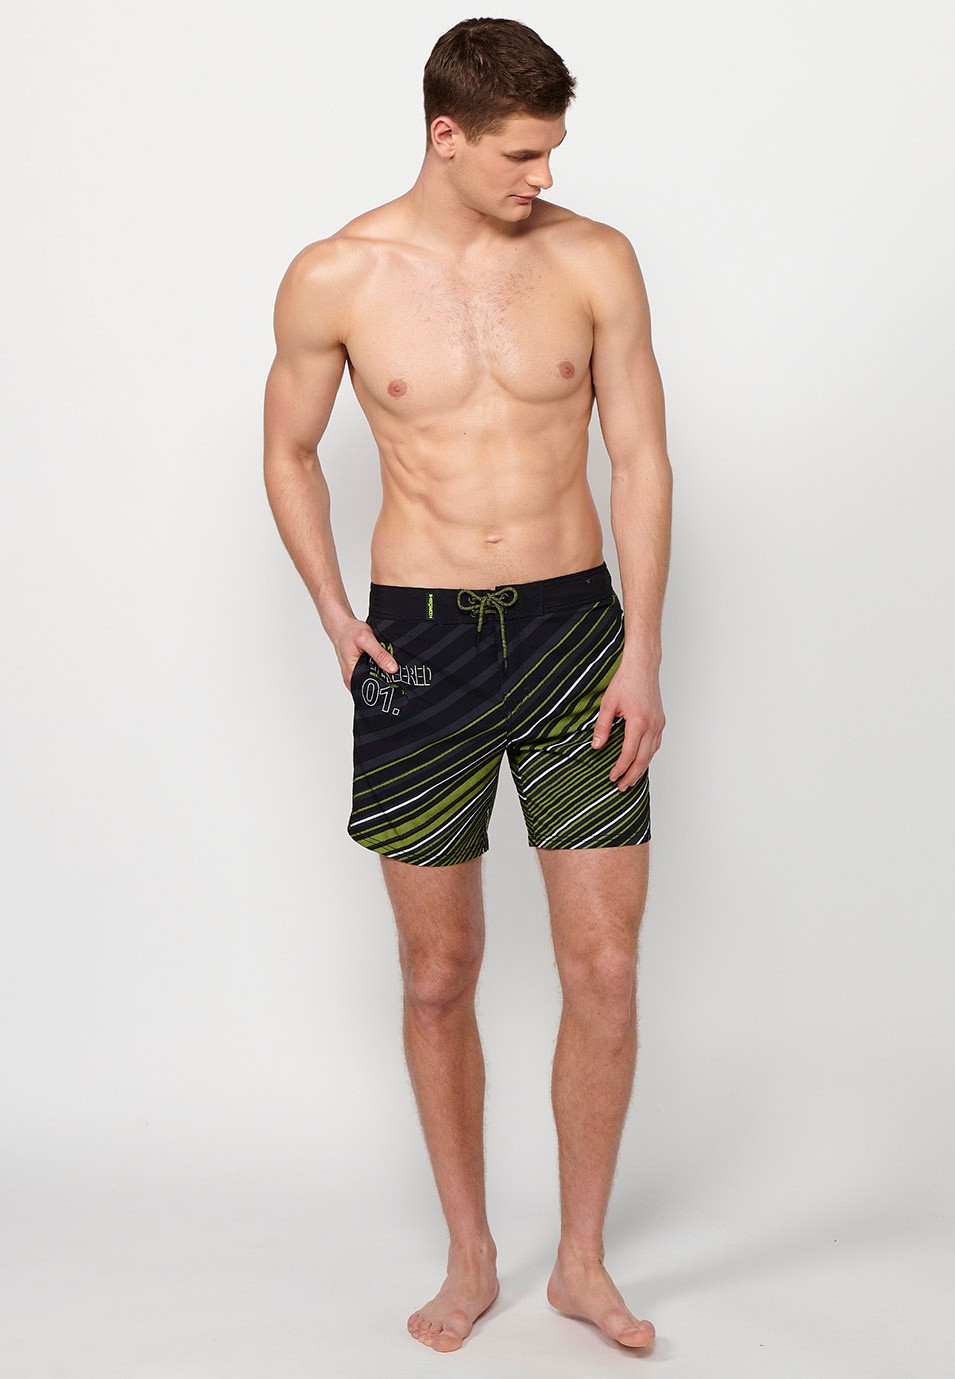 Printed short swimsuit with adjustable waist with drawstring and back pocket and one interior pocket in Lime Color for Men